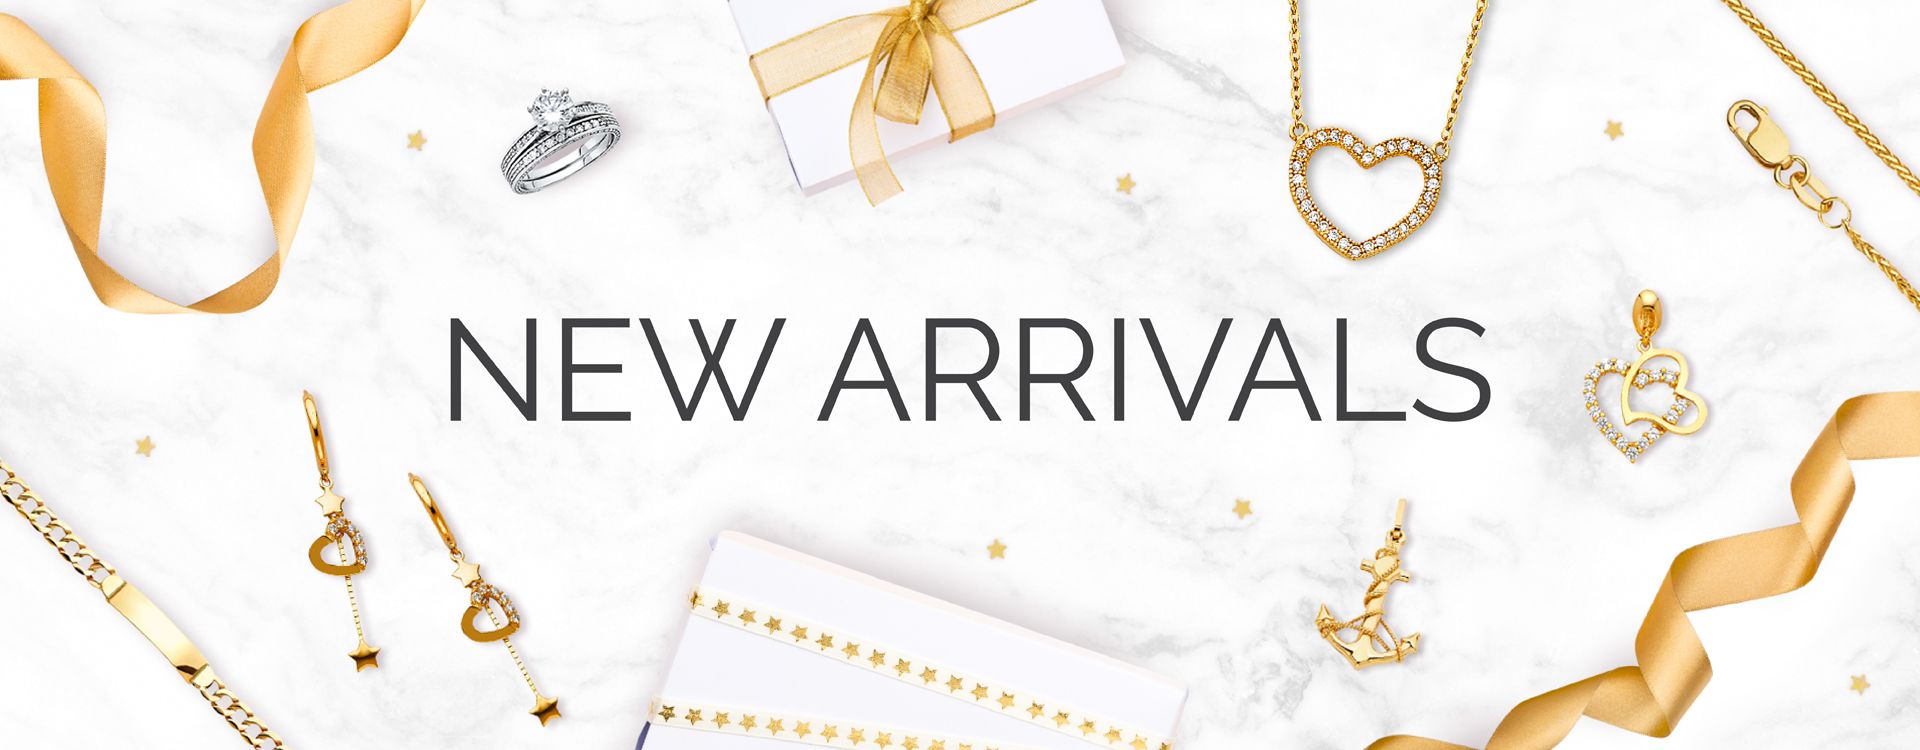 Shop our New Arrivals collection at My Jewelry Plaza